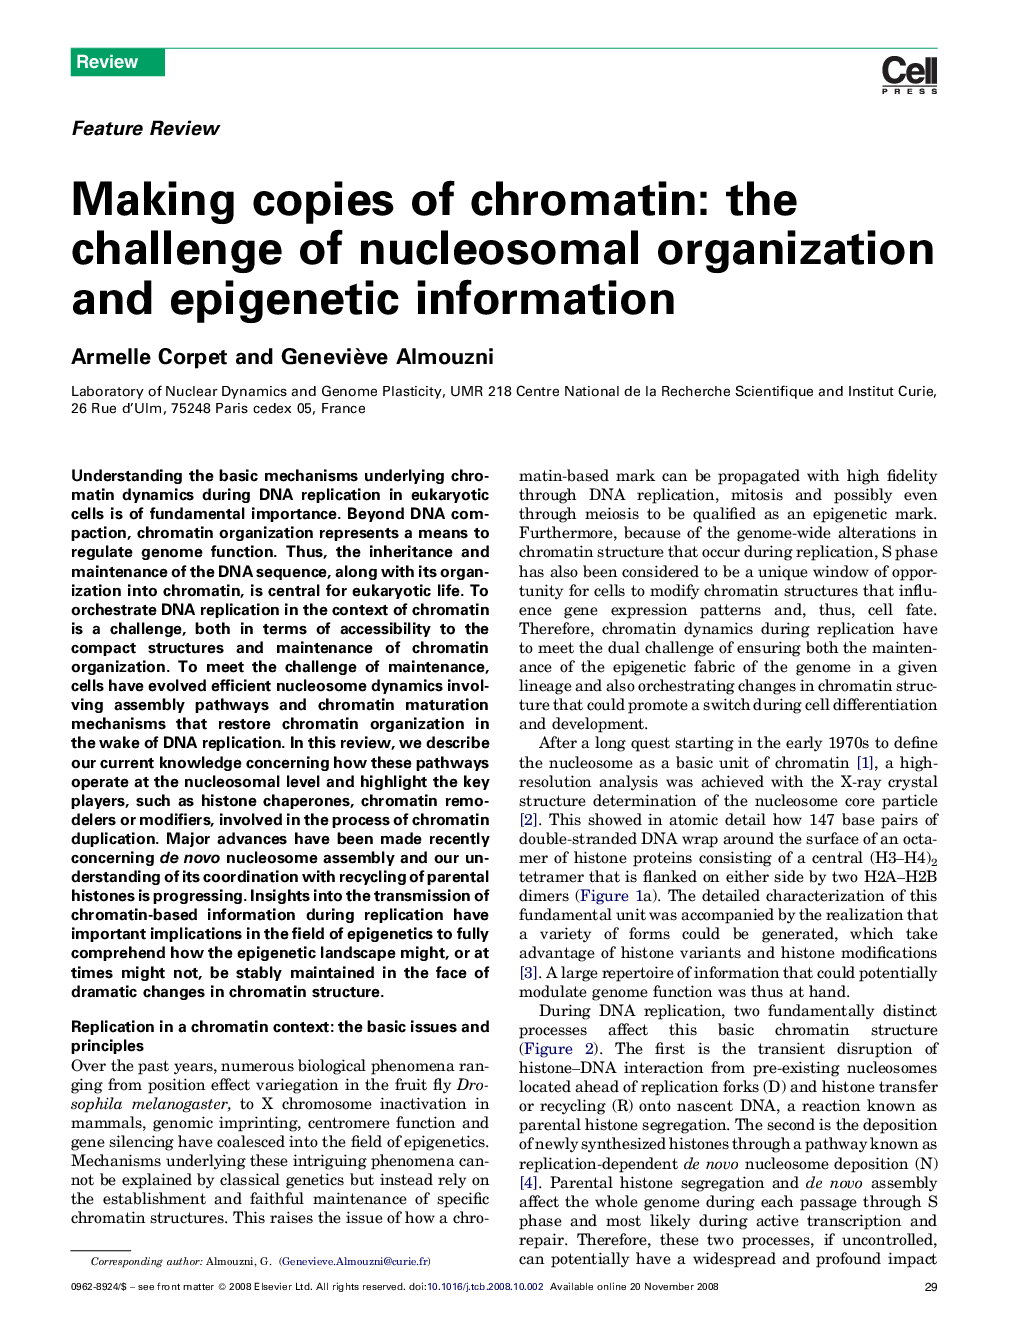 Making copies of chromatin: the challenge of nucleosomal organization and epigenetic information